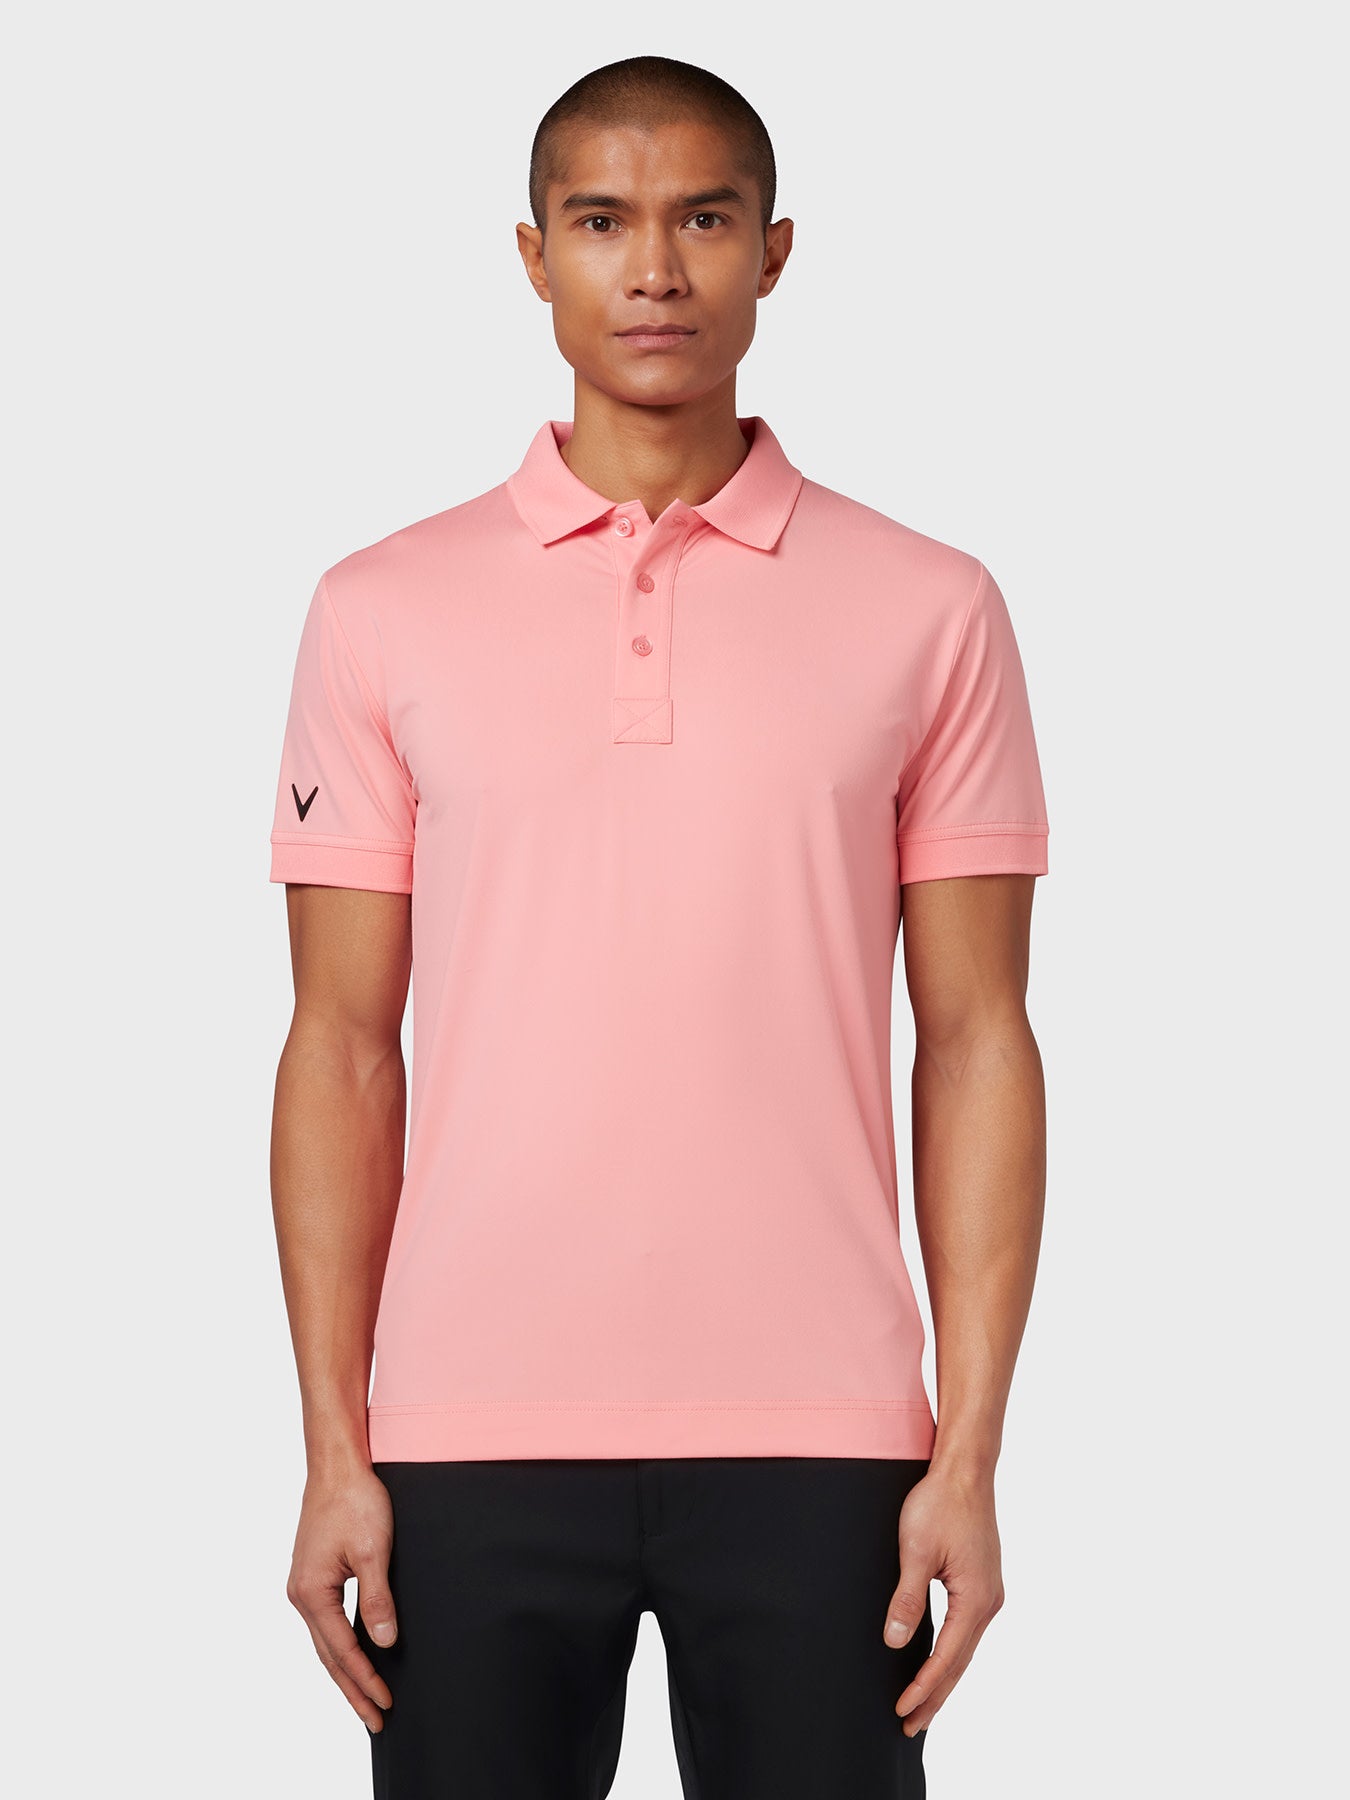 View X Series Solid Ribbed Polo In Geranium Pink Geranium Pink L information